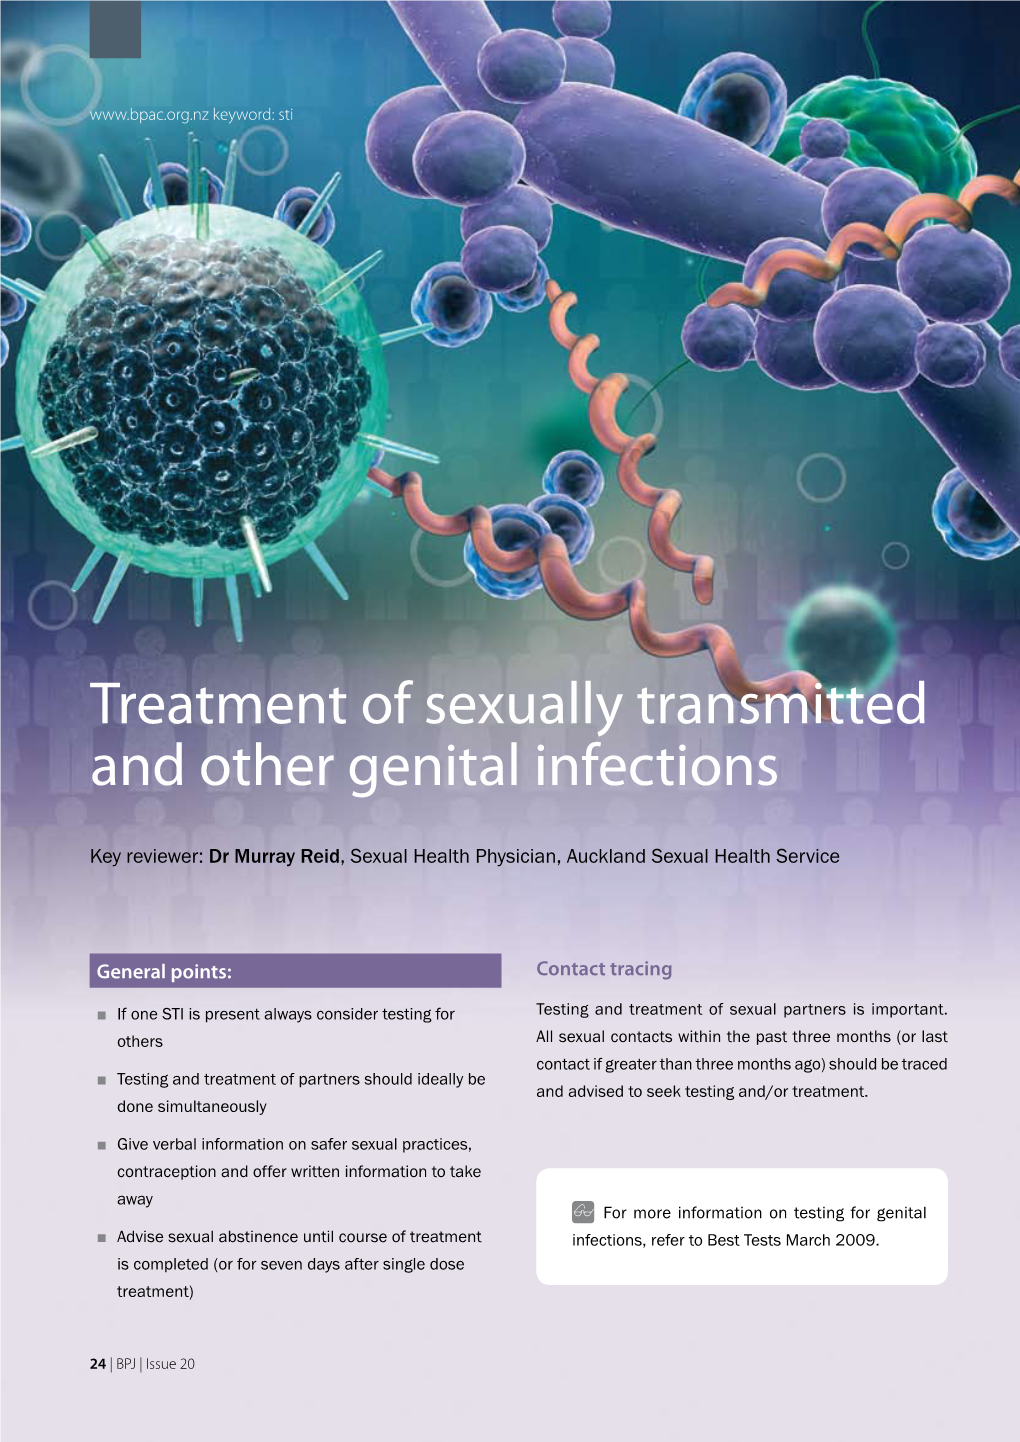 Treatment of Sexually Transmitted and Other Genital Infections